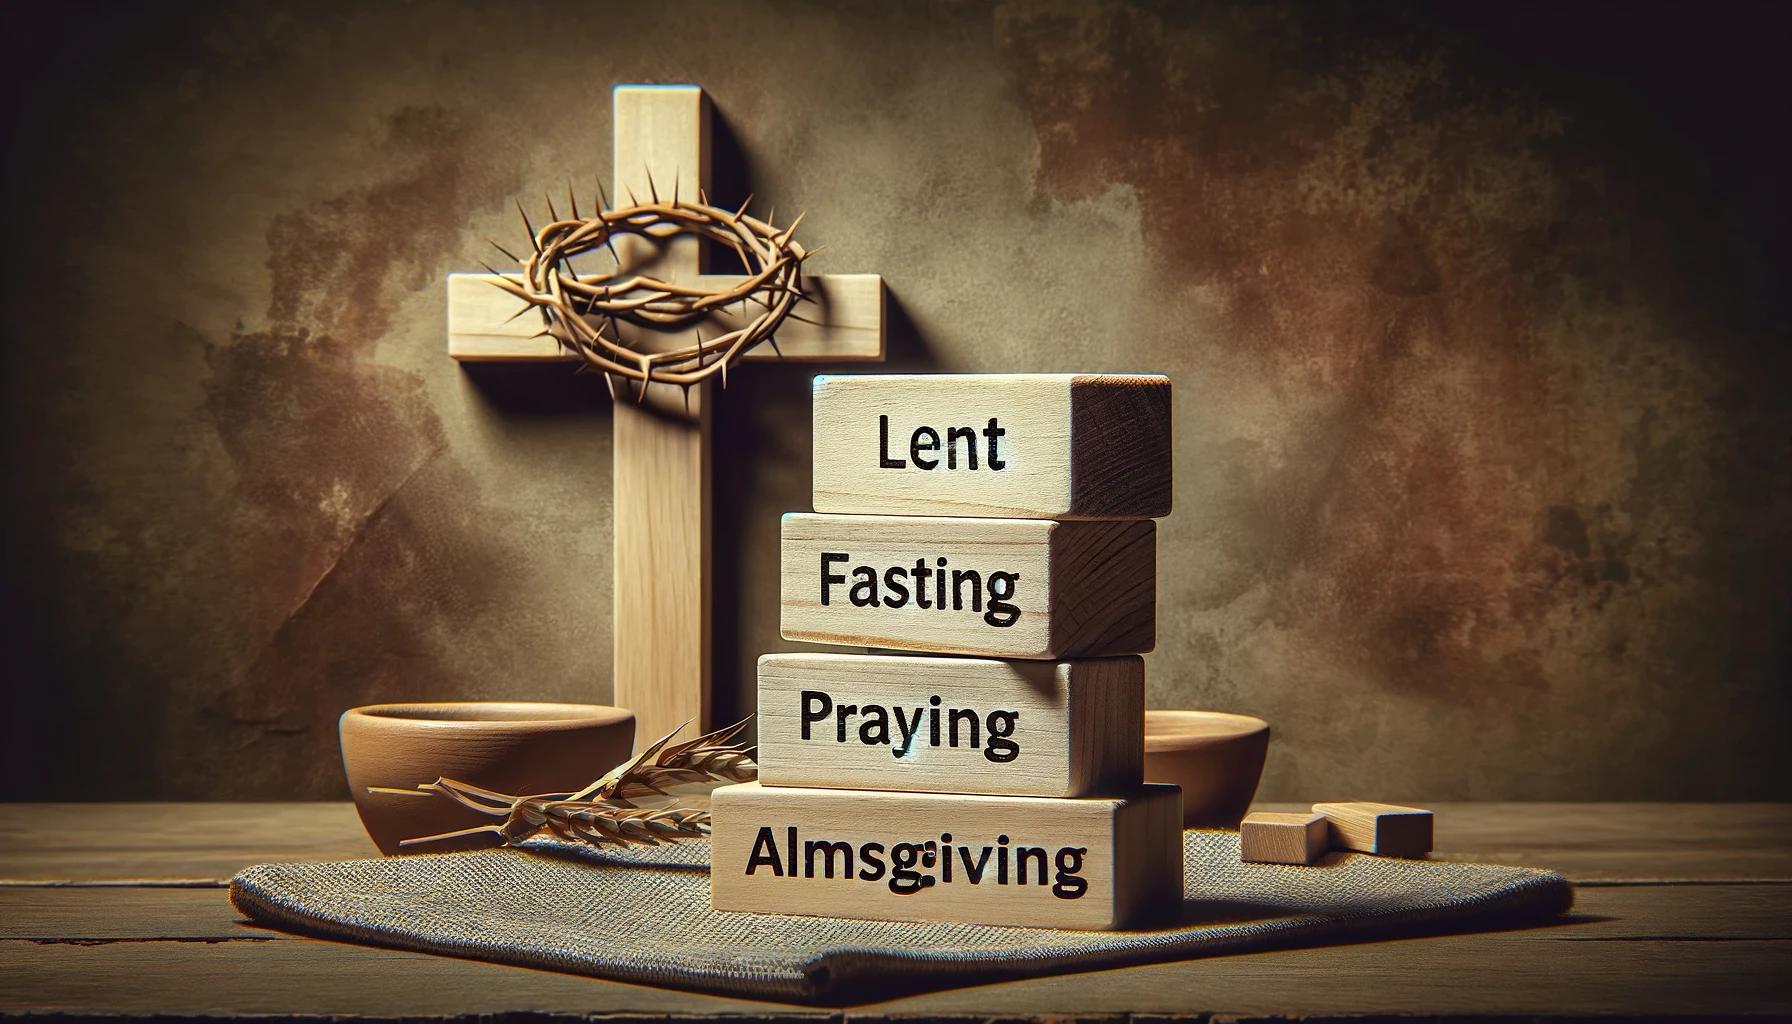 What Are The Three Practices Of Lent?